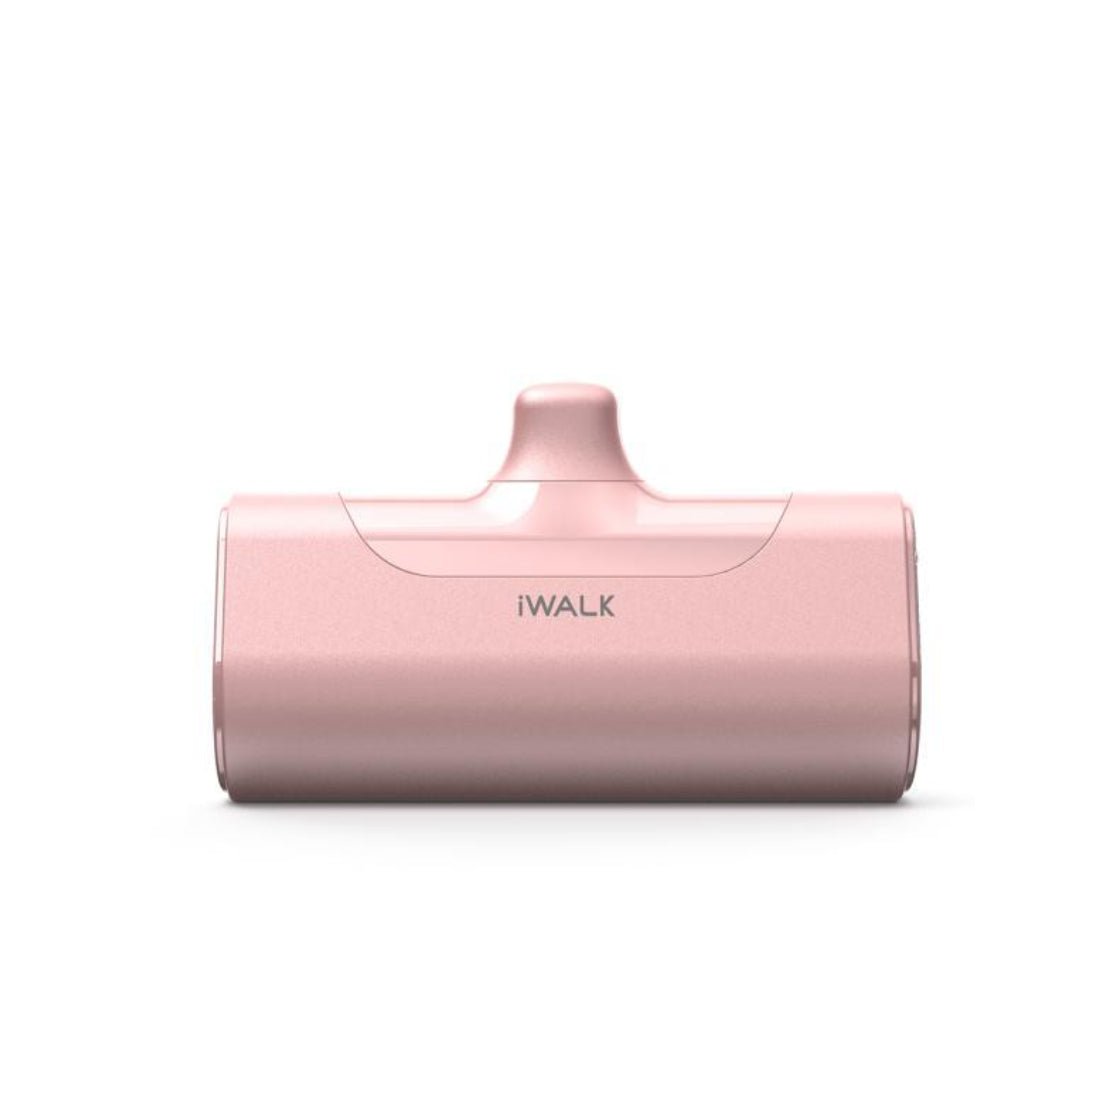 iWalk 4500mAh Portable Charger USB Lightening Battery Pack - Pink - مز – Store  974